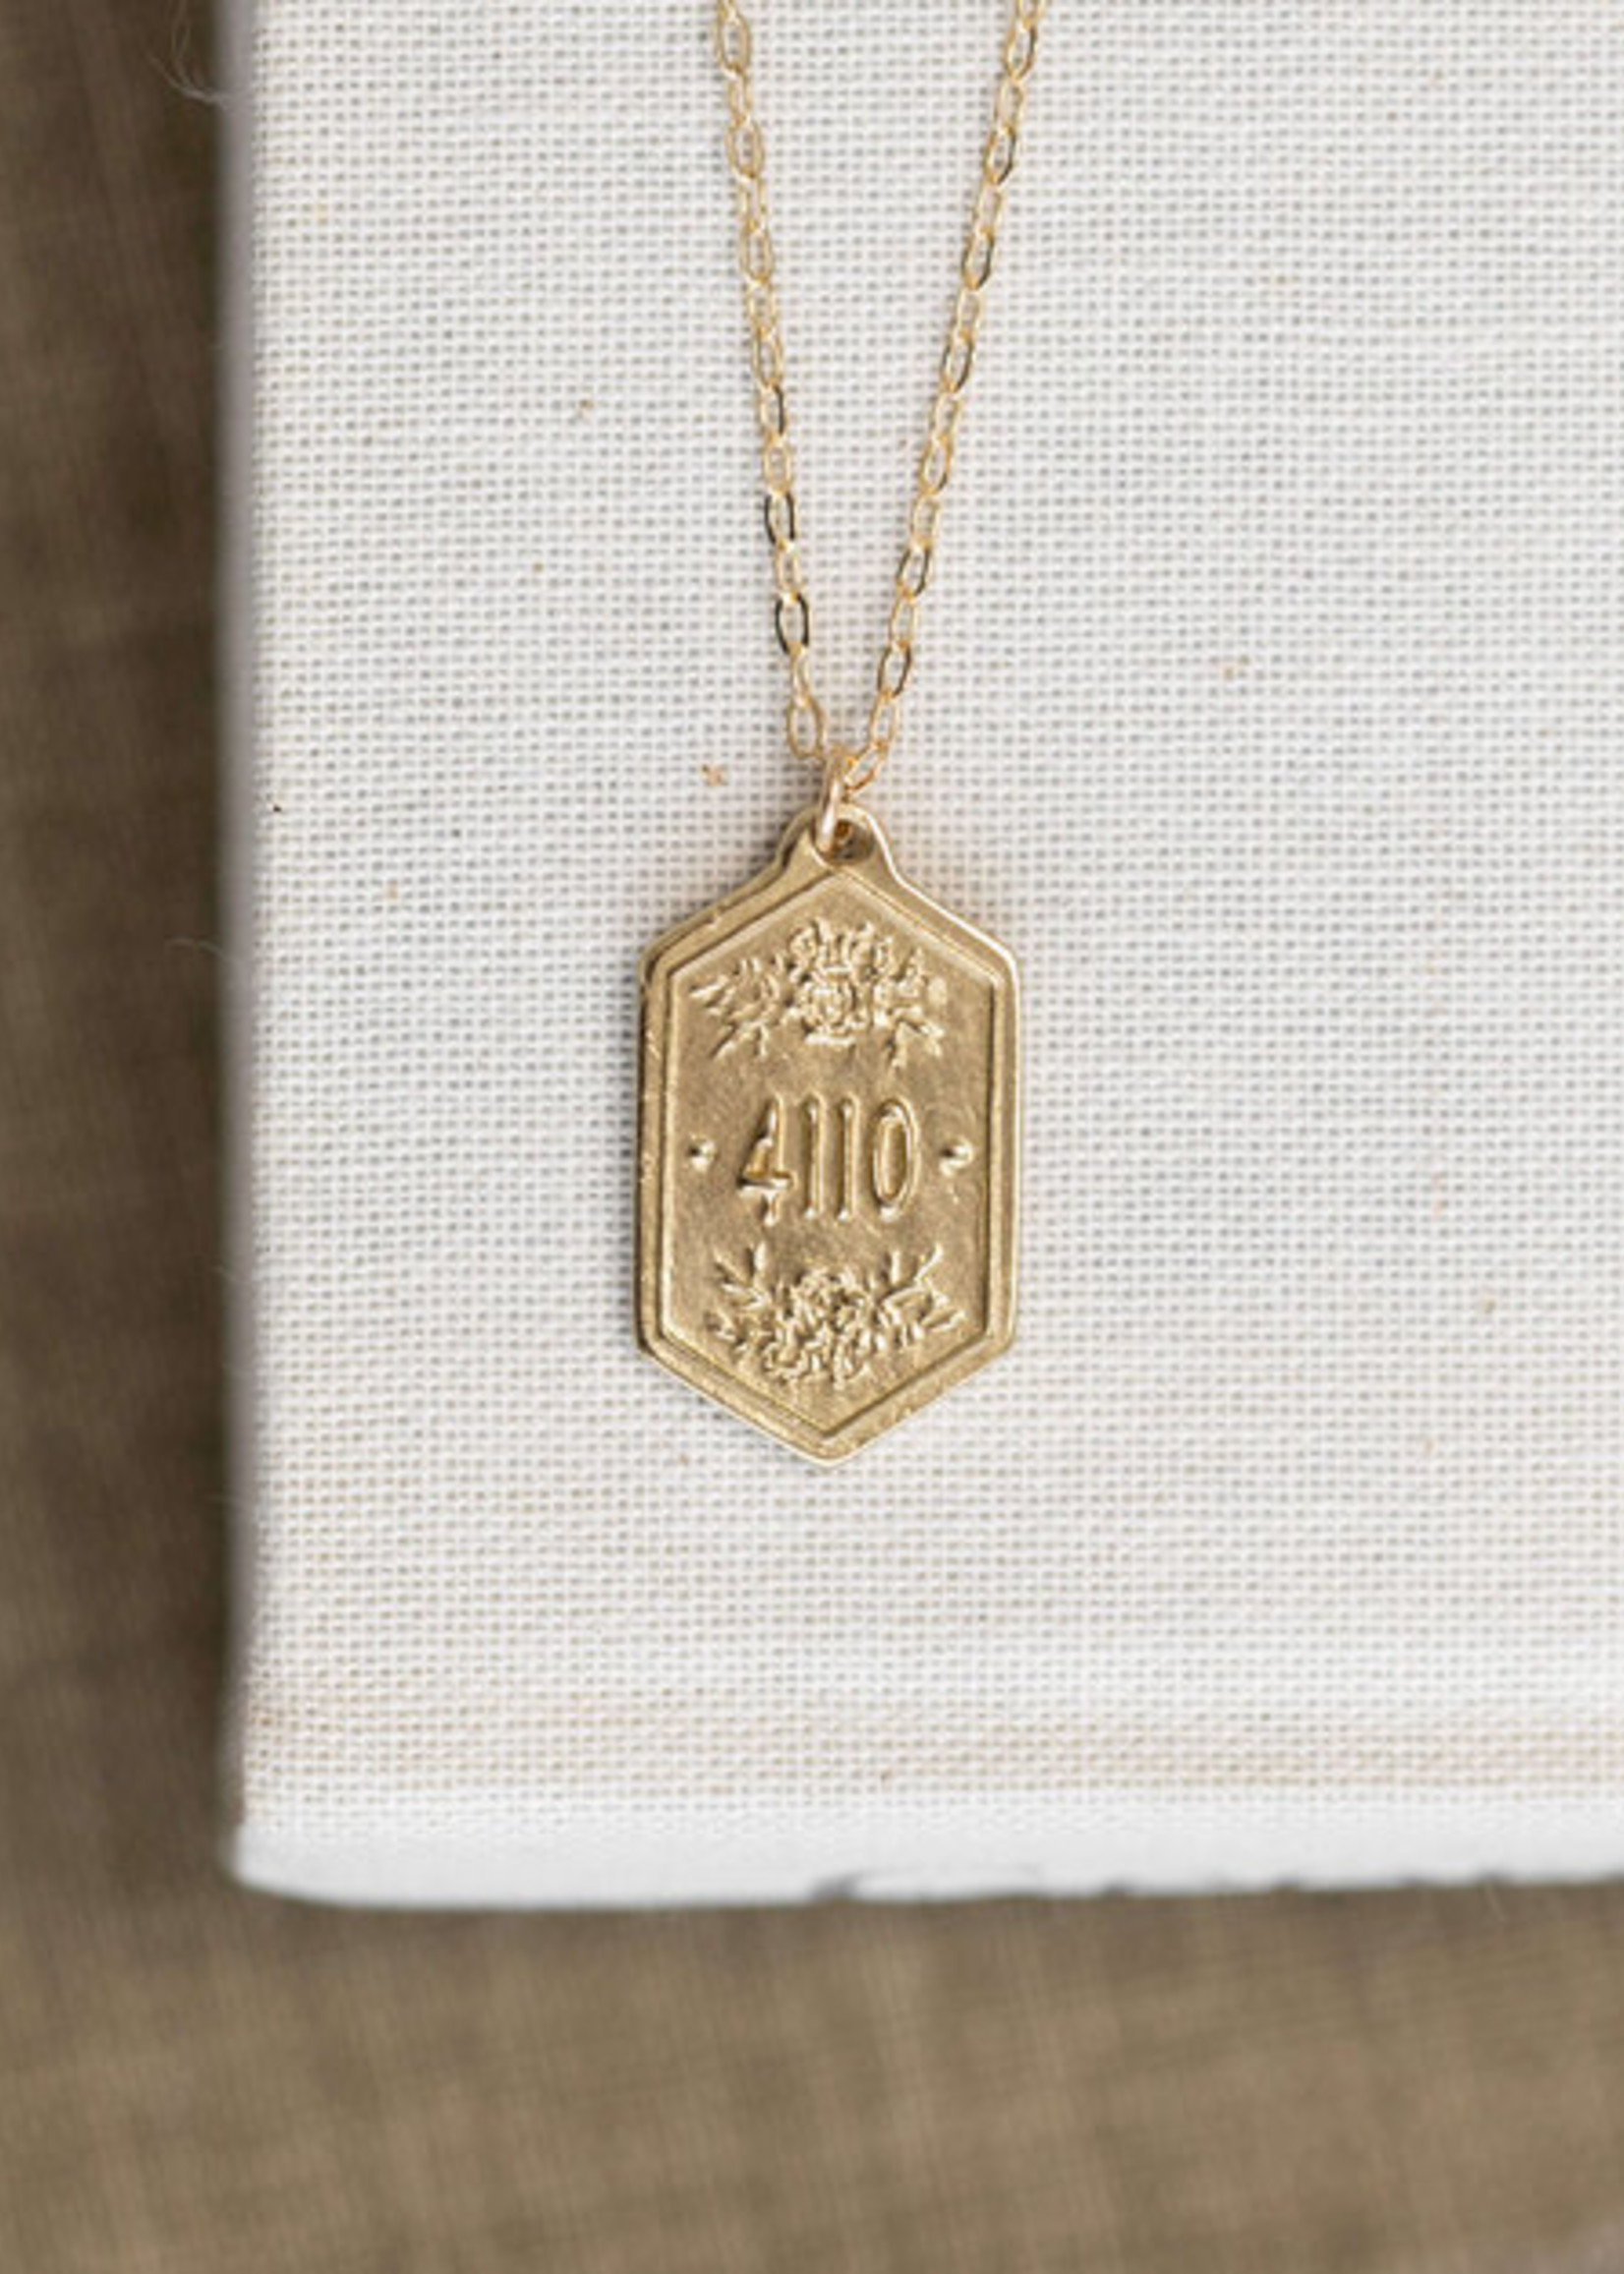 Scripture Inspired Pendant Necklace ISAIAH 41:10 32"